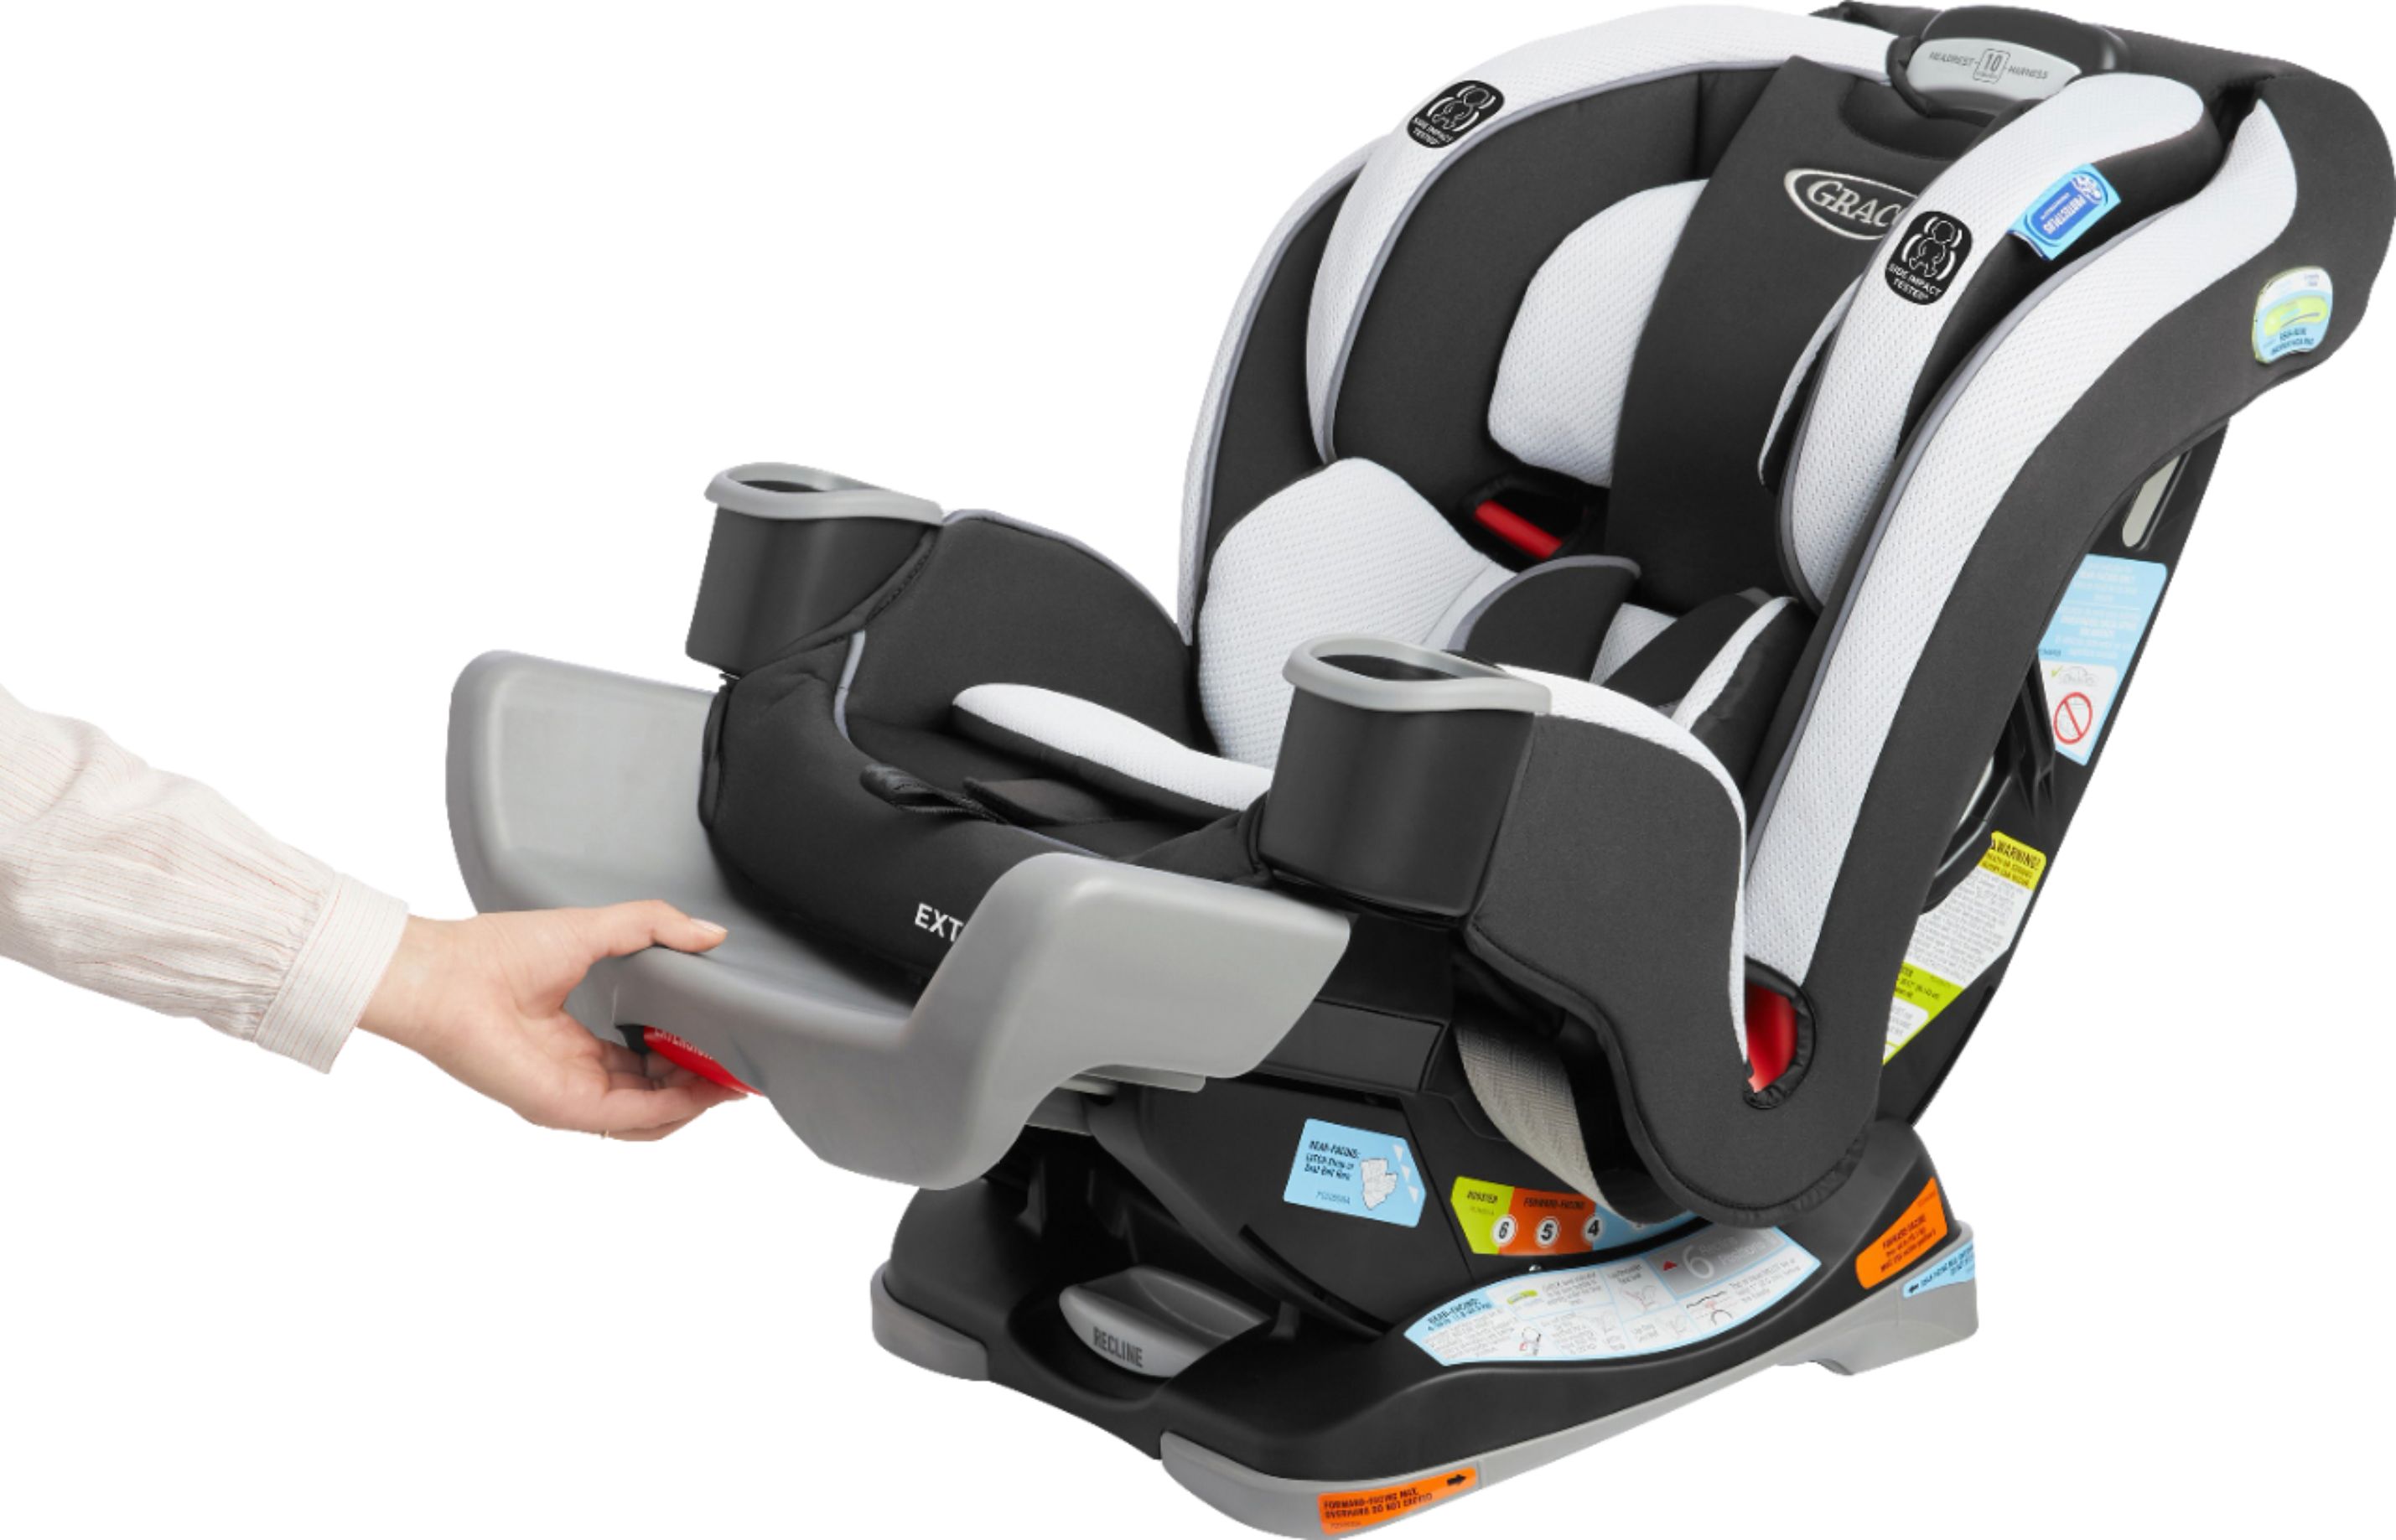 Graco Extend2Fit 3-in-1 Car Seat - Hamilton